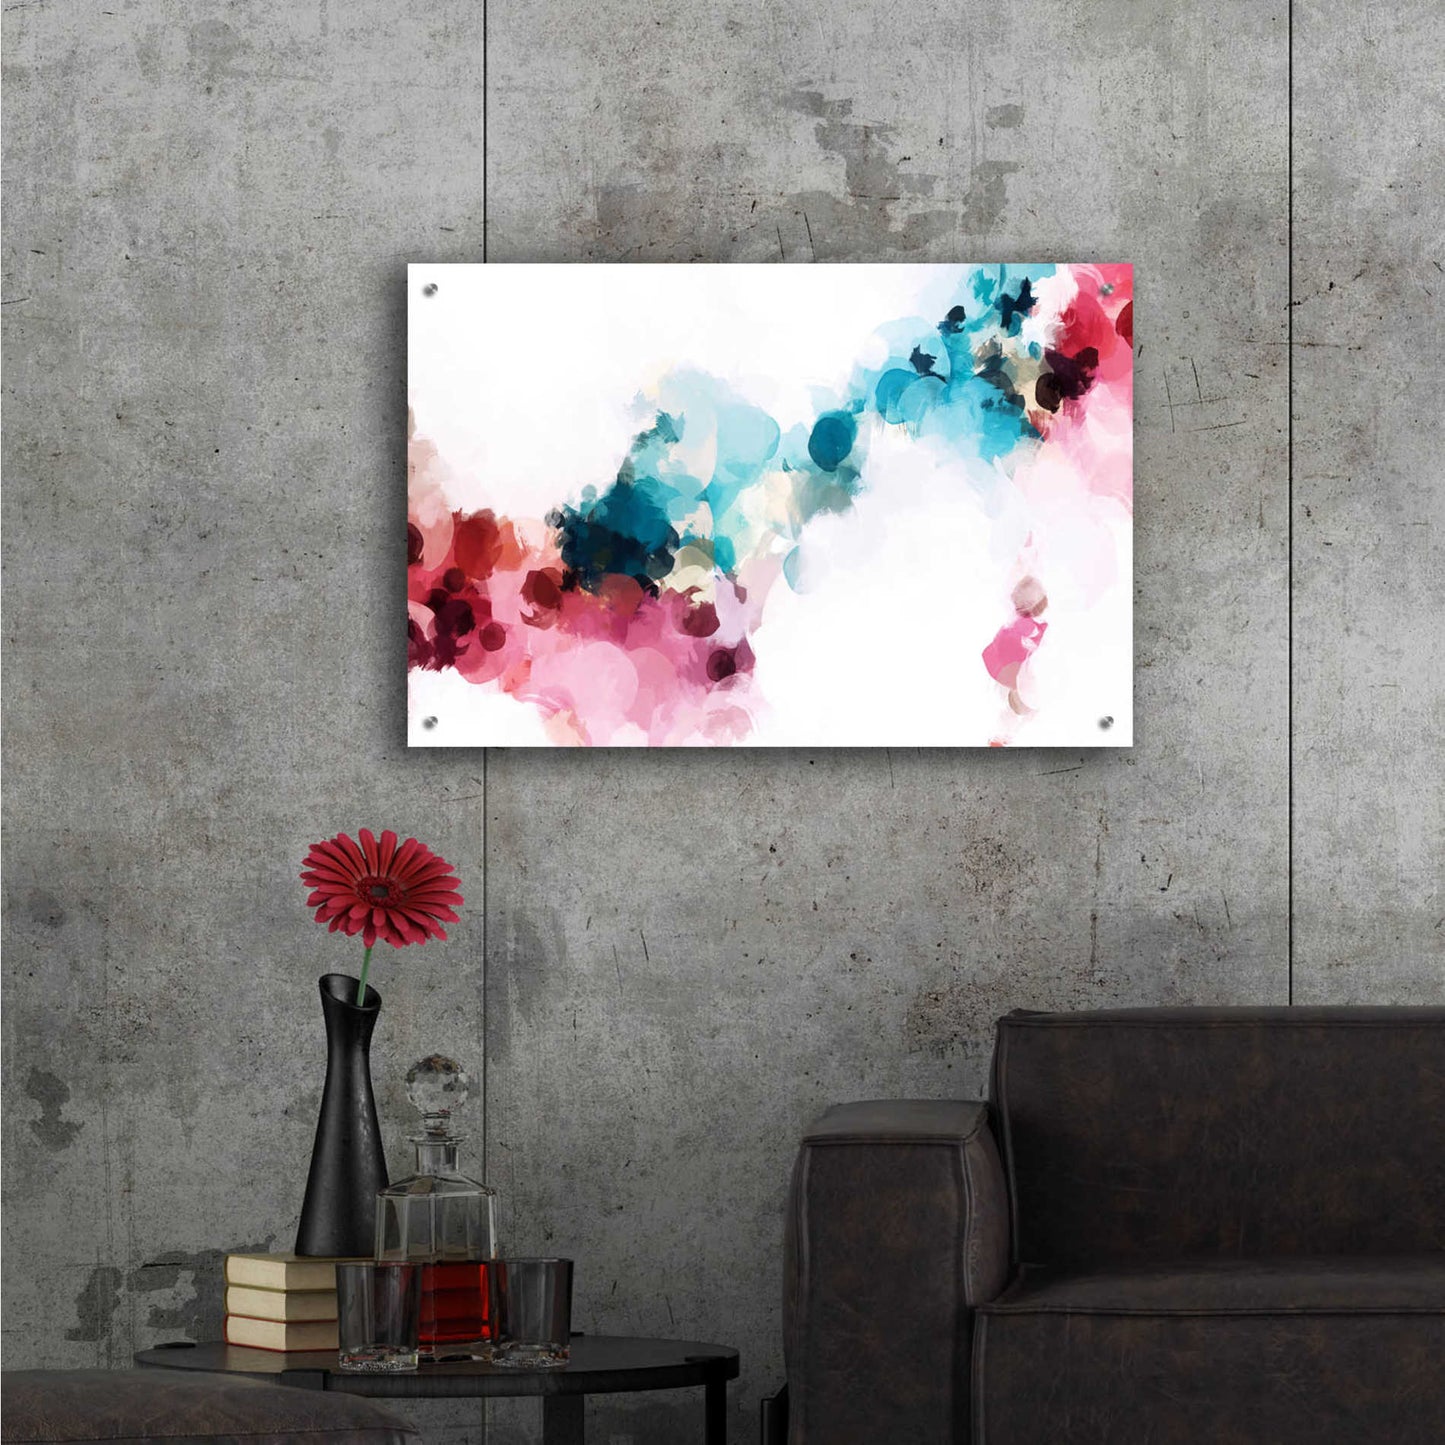 Epic Art 'Abstract Colorful Flows 17' by Irena Orlov Acrylic Glass Wall Art,36x24